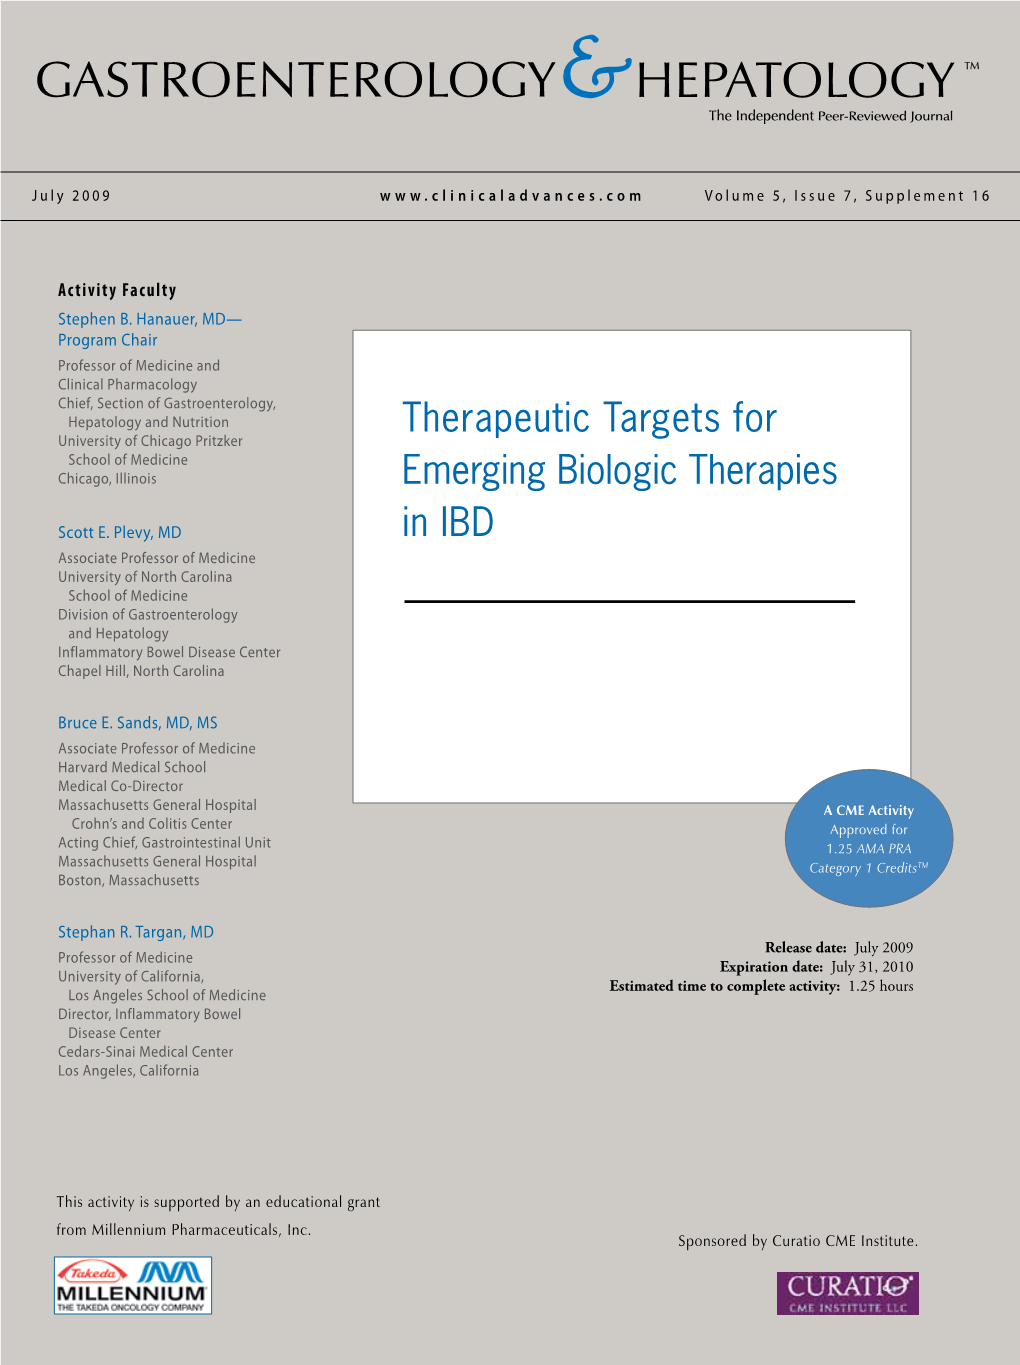 Therapeutic Targets for Emerging Biologic Therapies in IBD 4